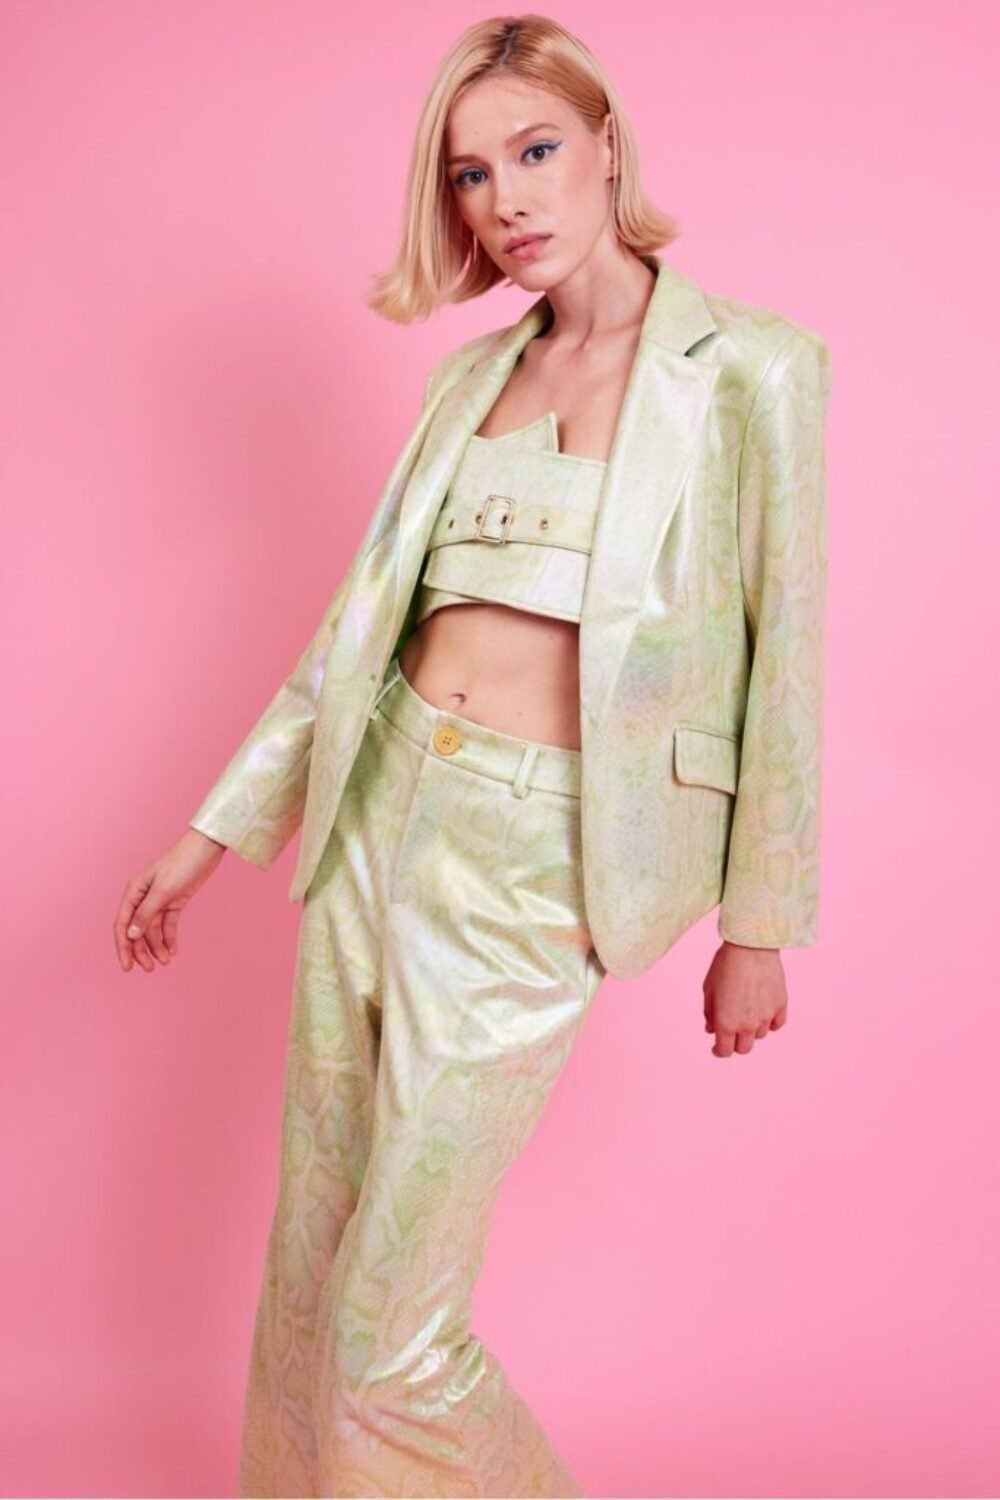 Shop Lux Faux leather Mint Green Metallic Blazer and women's luxury and designer clothes at www.lux-apparel.co.uk